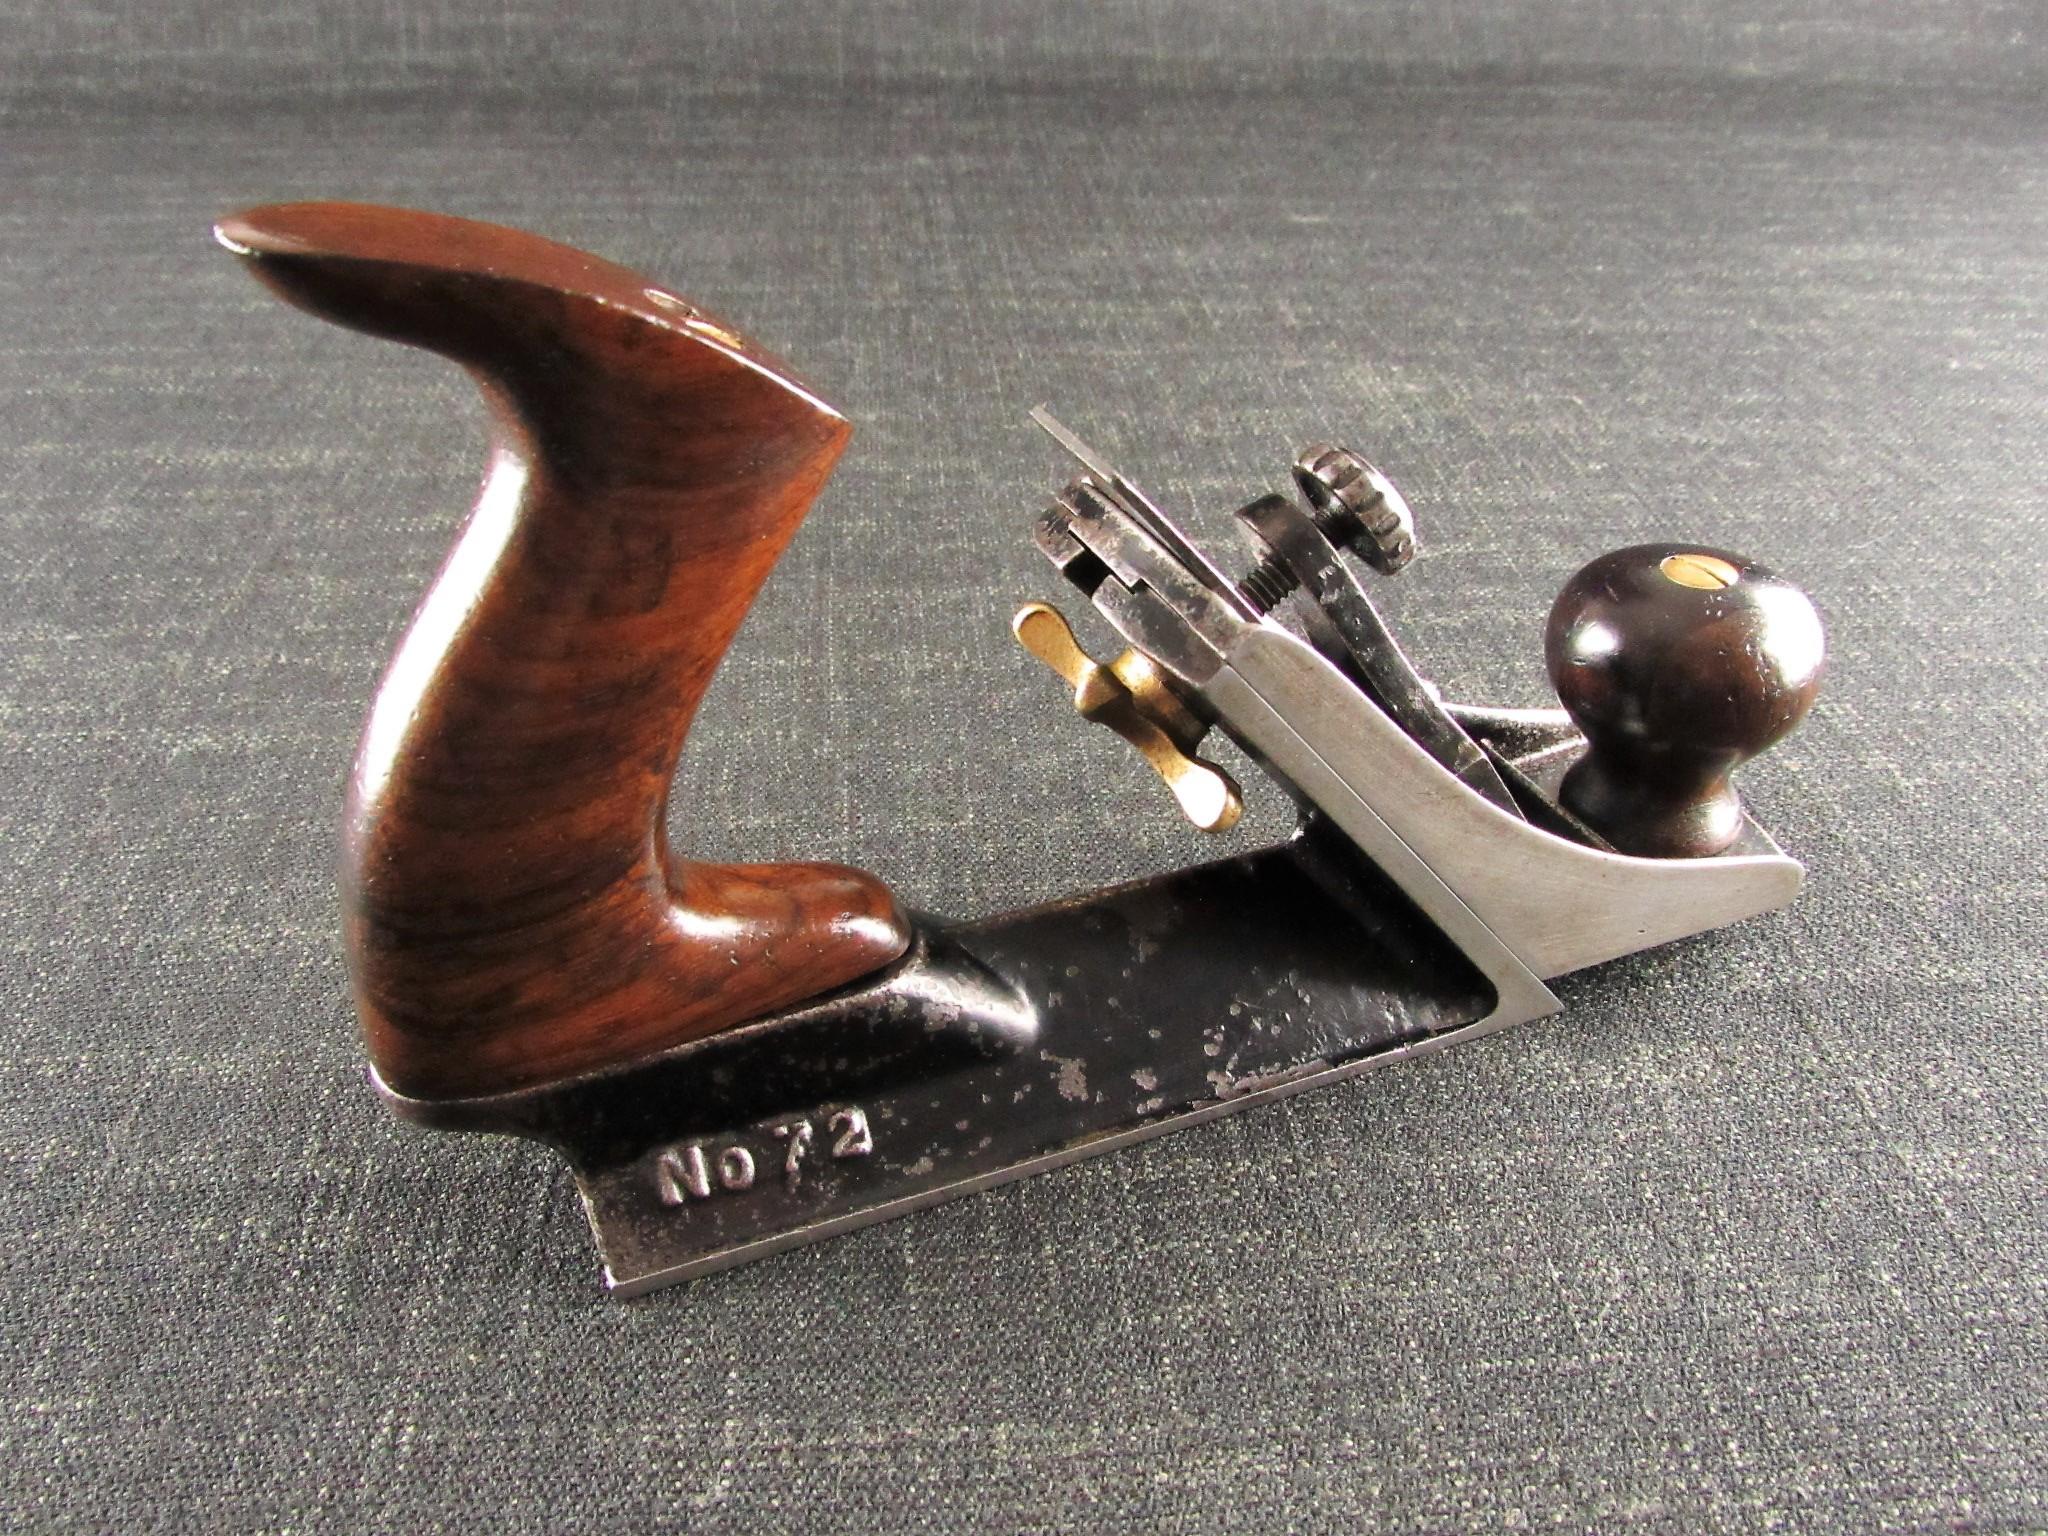 Scarce Early American STANLEY No 72 Chamfer Plane - Type 2